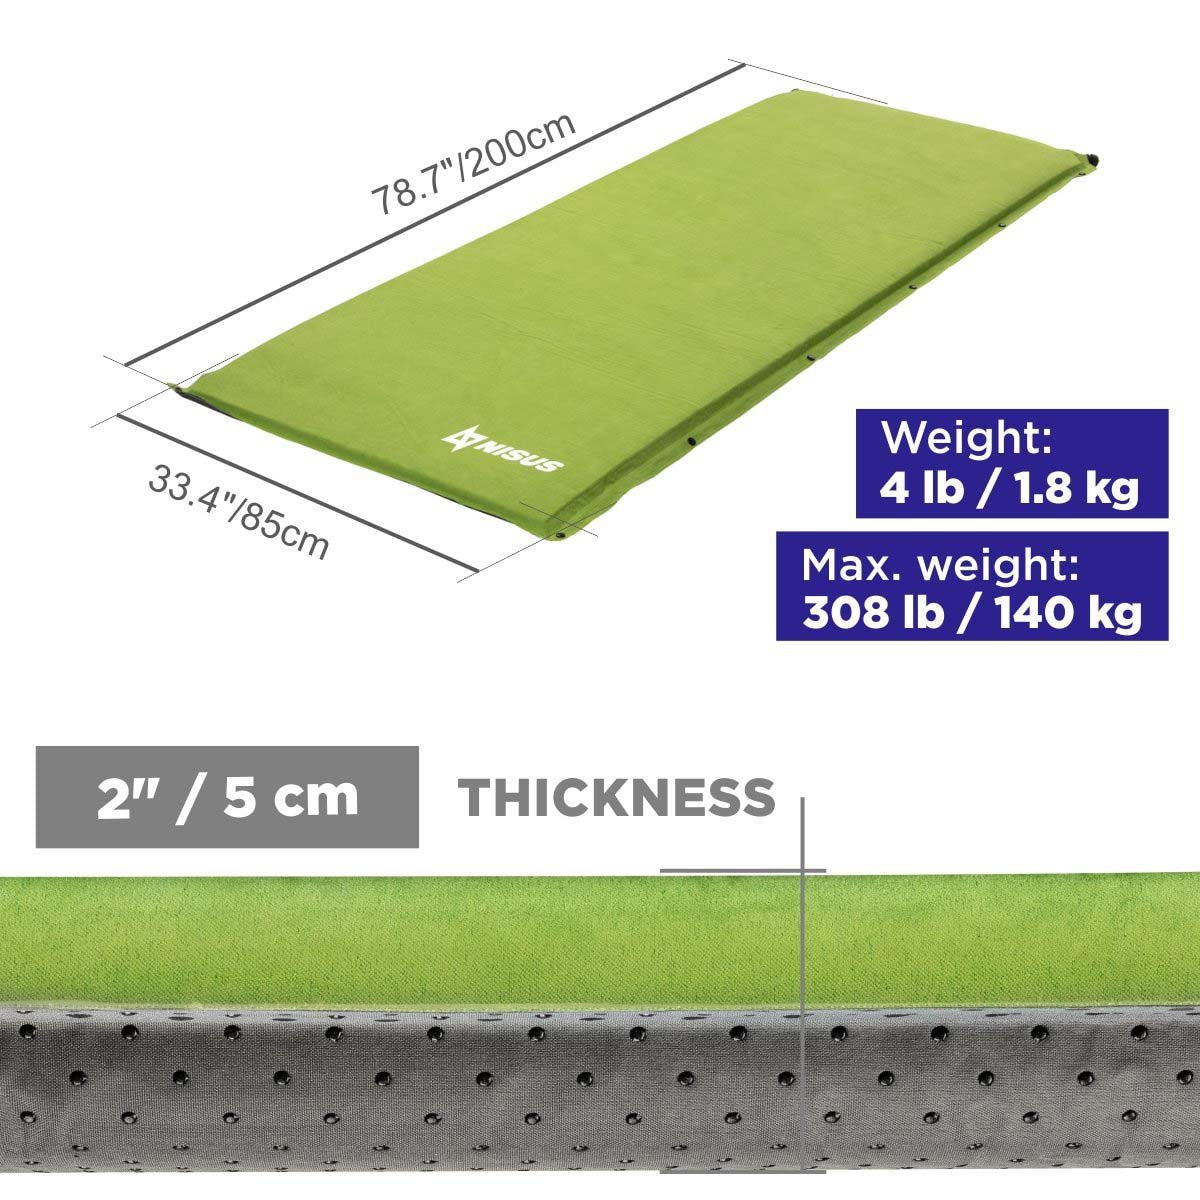 2-inch Lightweight Self Inflating Camping Sleeping Pad weighs 4 lbs, carries up to 308 lbs. It is 78.7 inches long and 33.4 inches wide